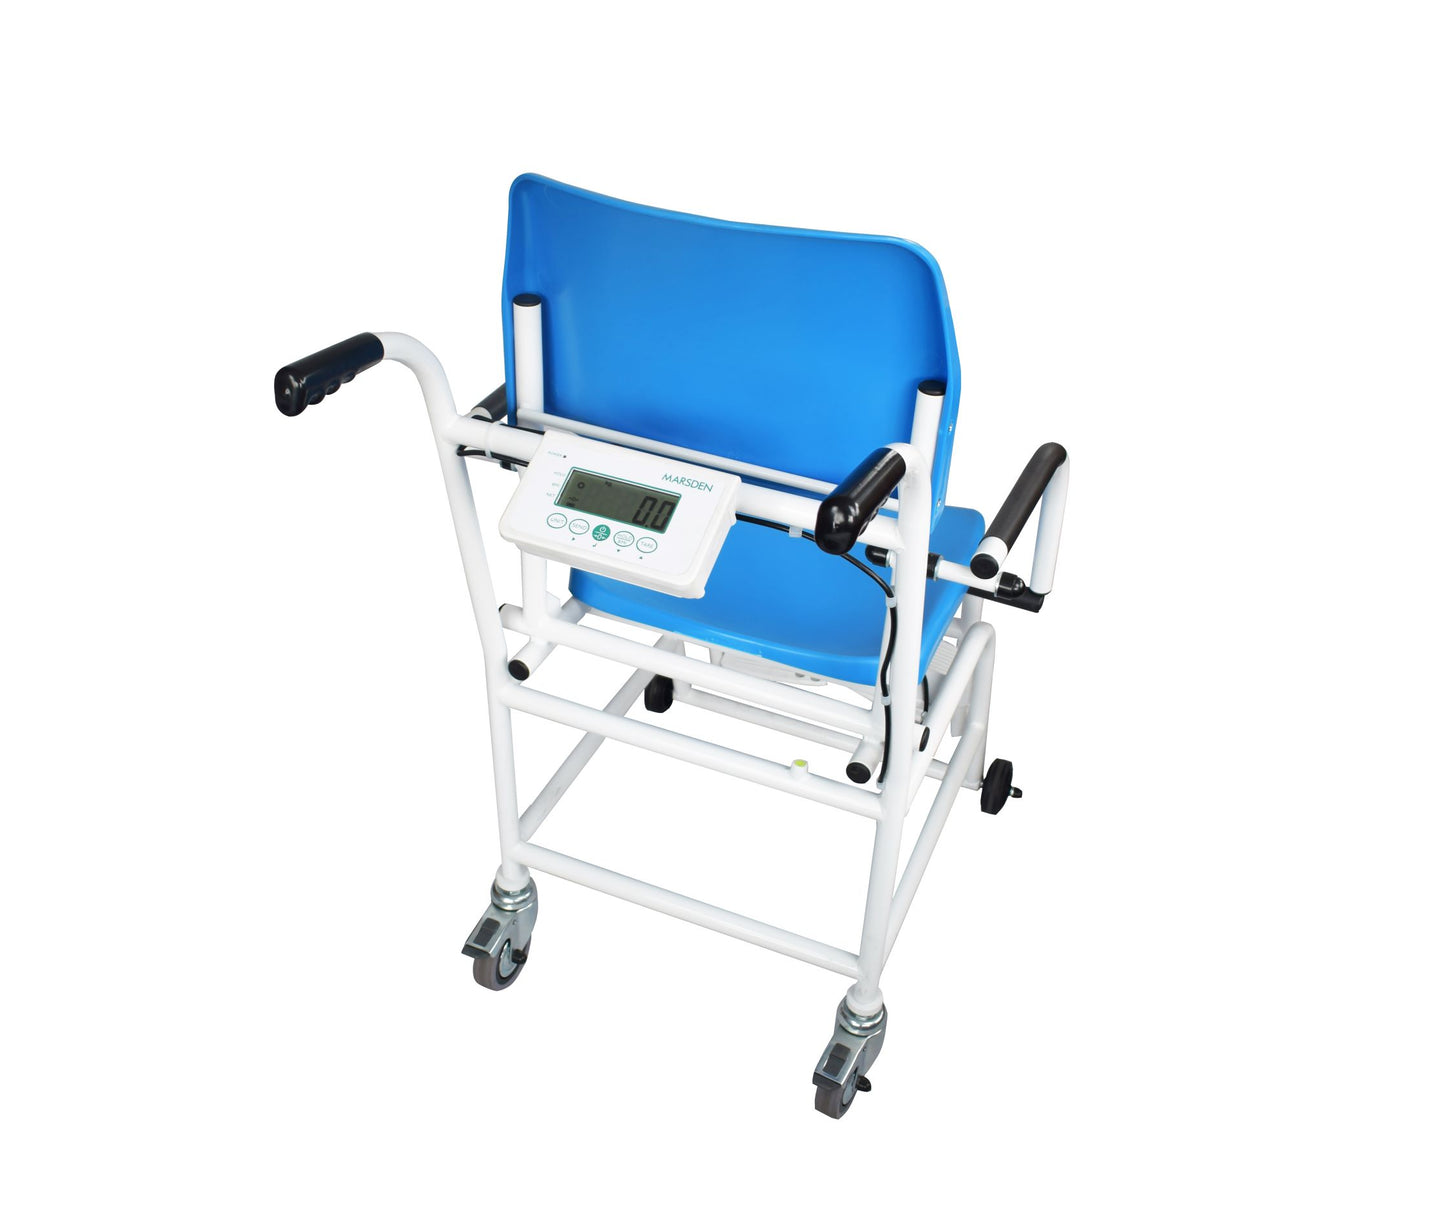 Marsden - Entry Level Lightweight Chair Scale with BMI and BSA - Approved